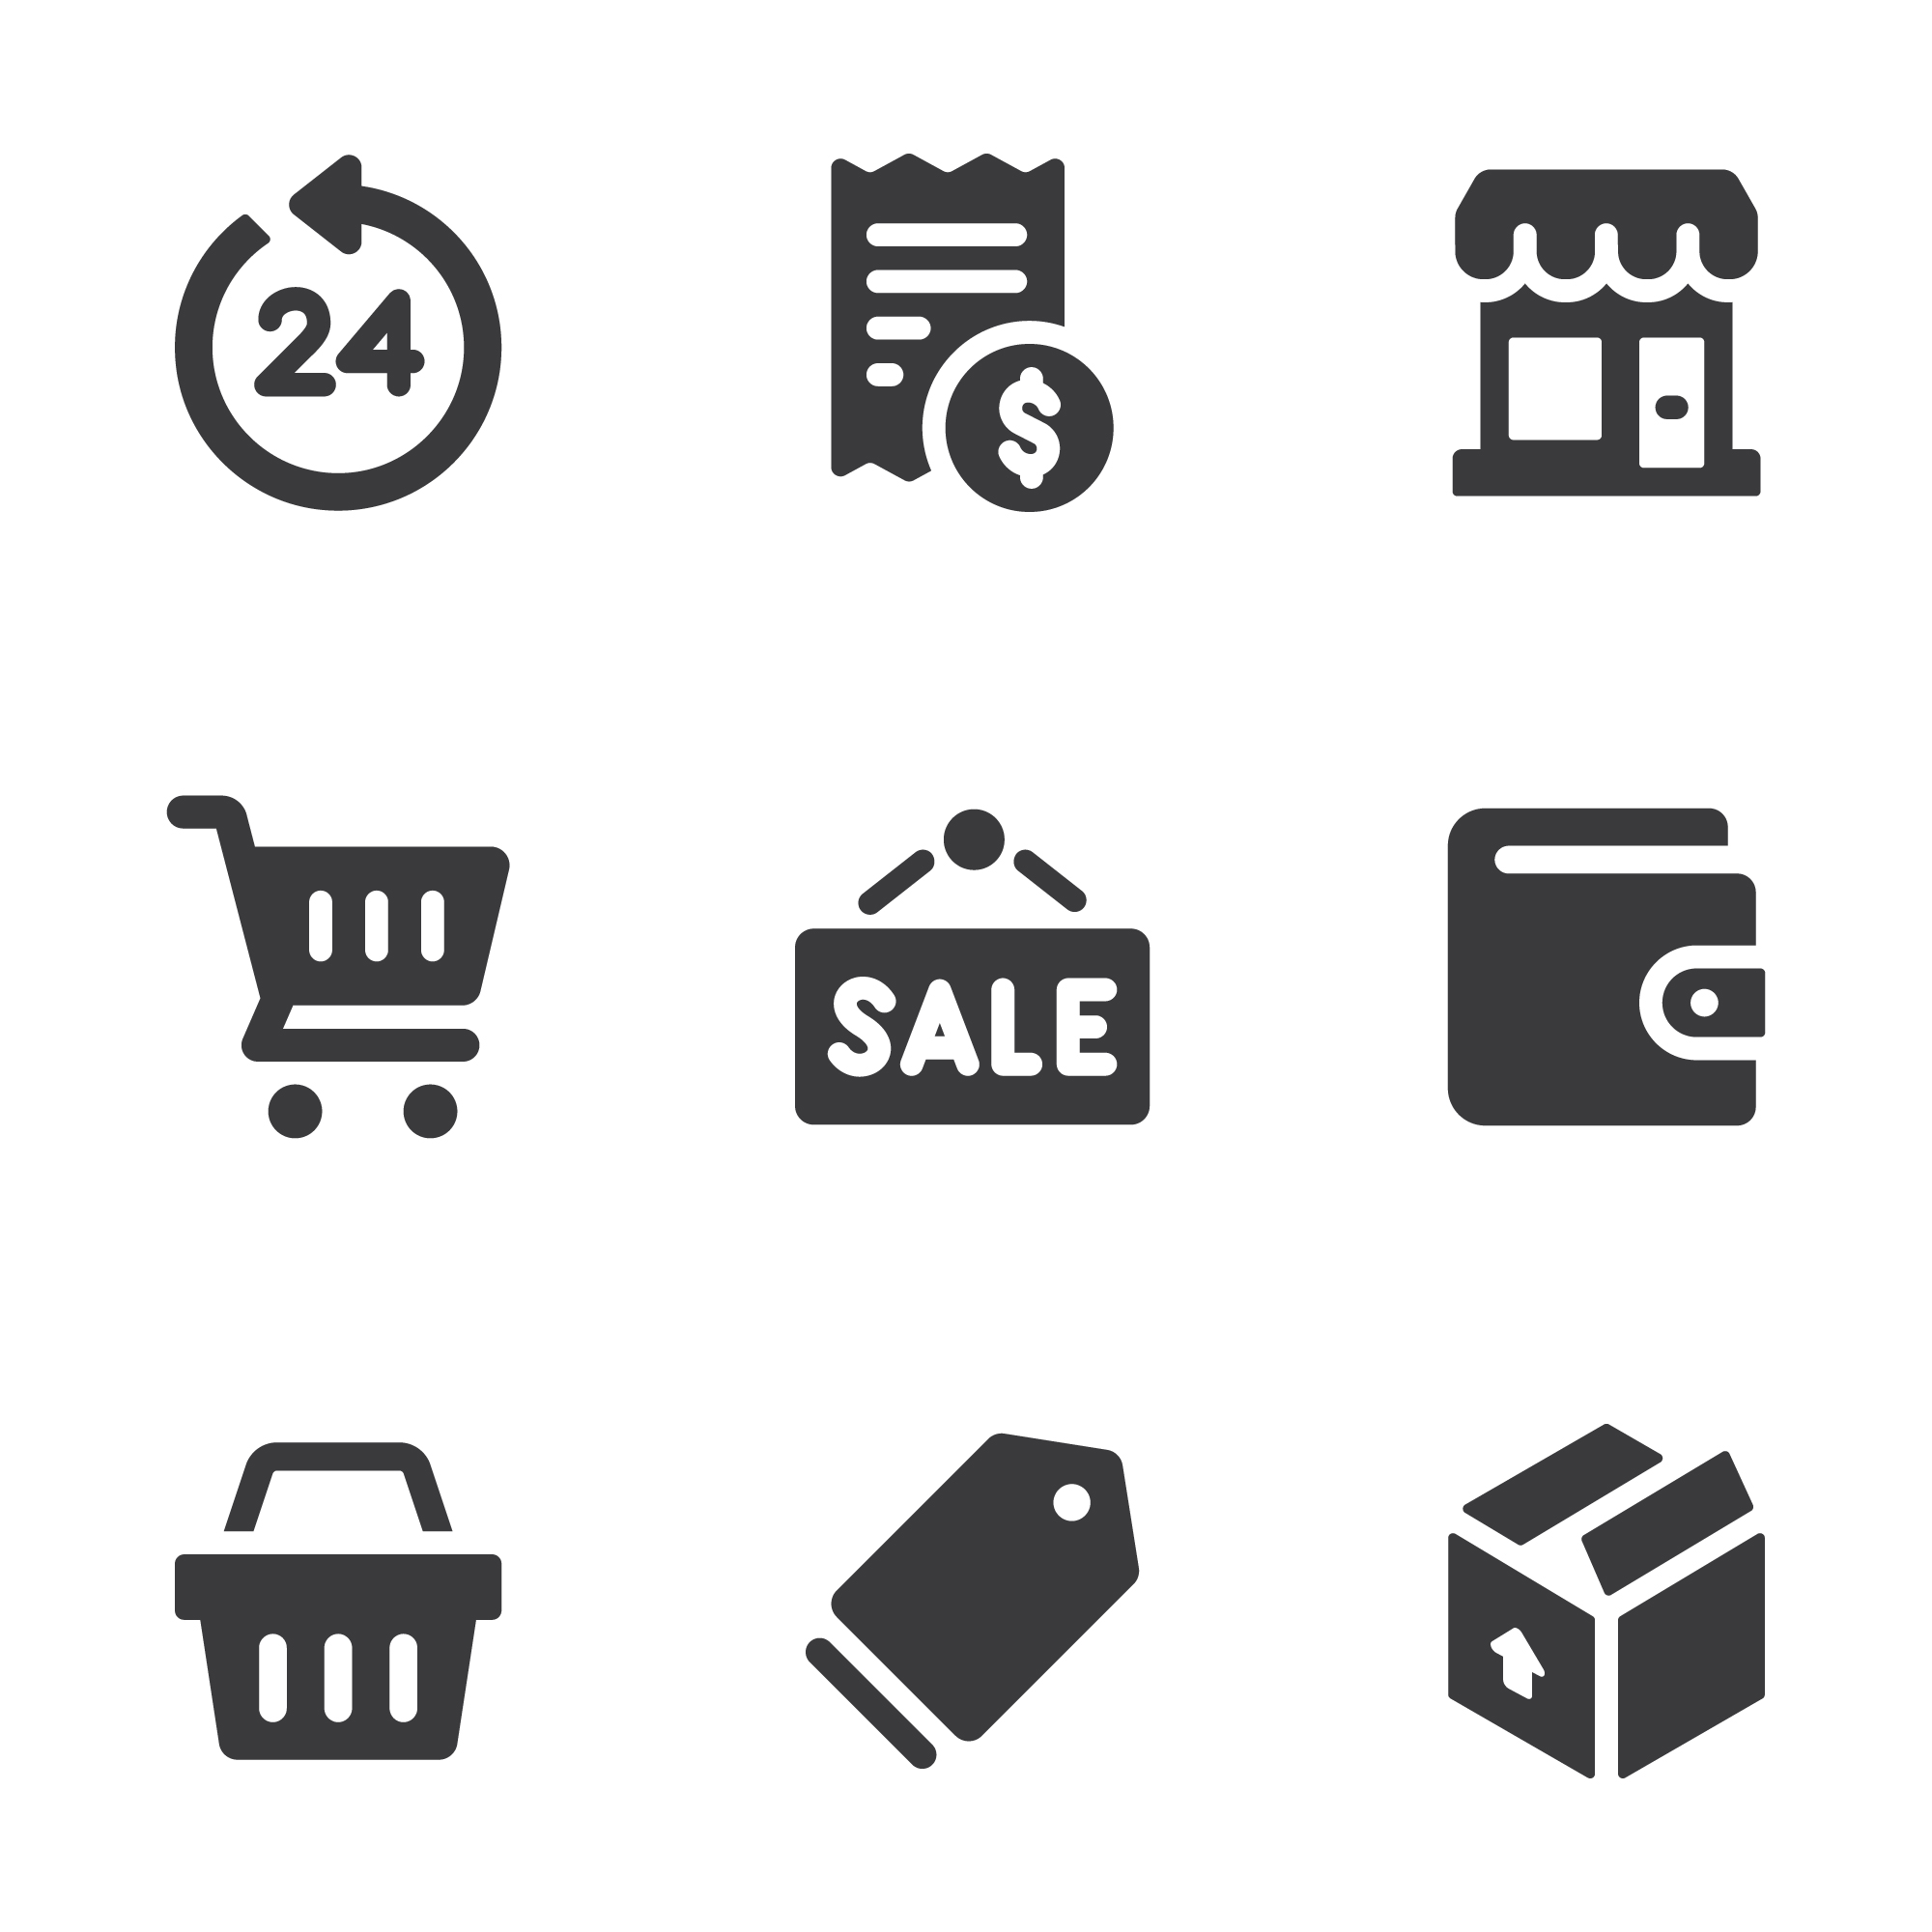 Set of black and white icons for sale.